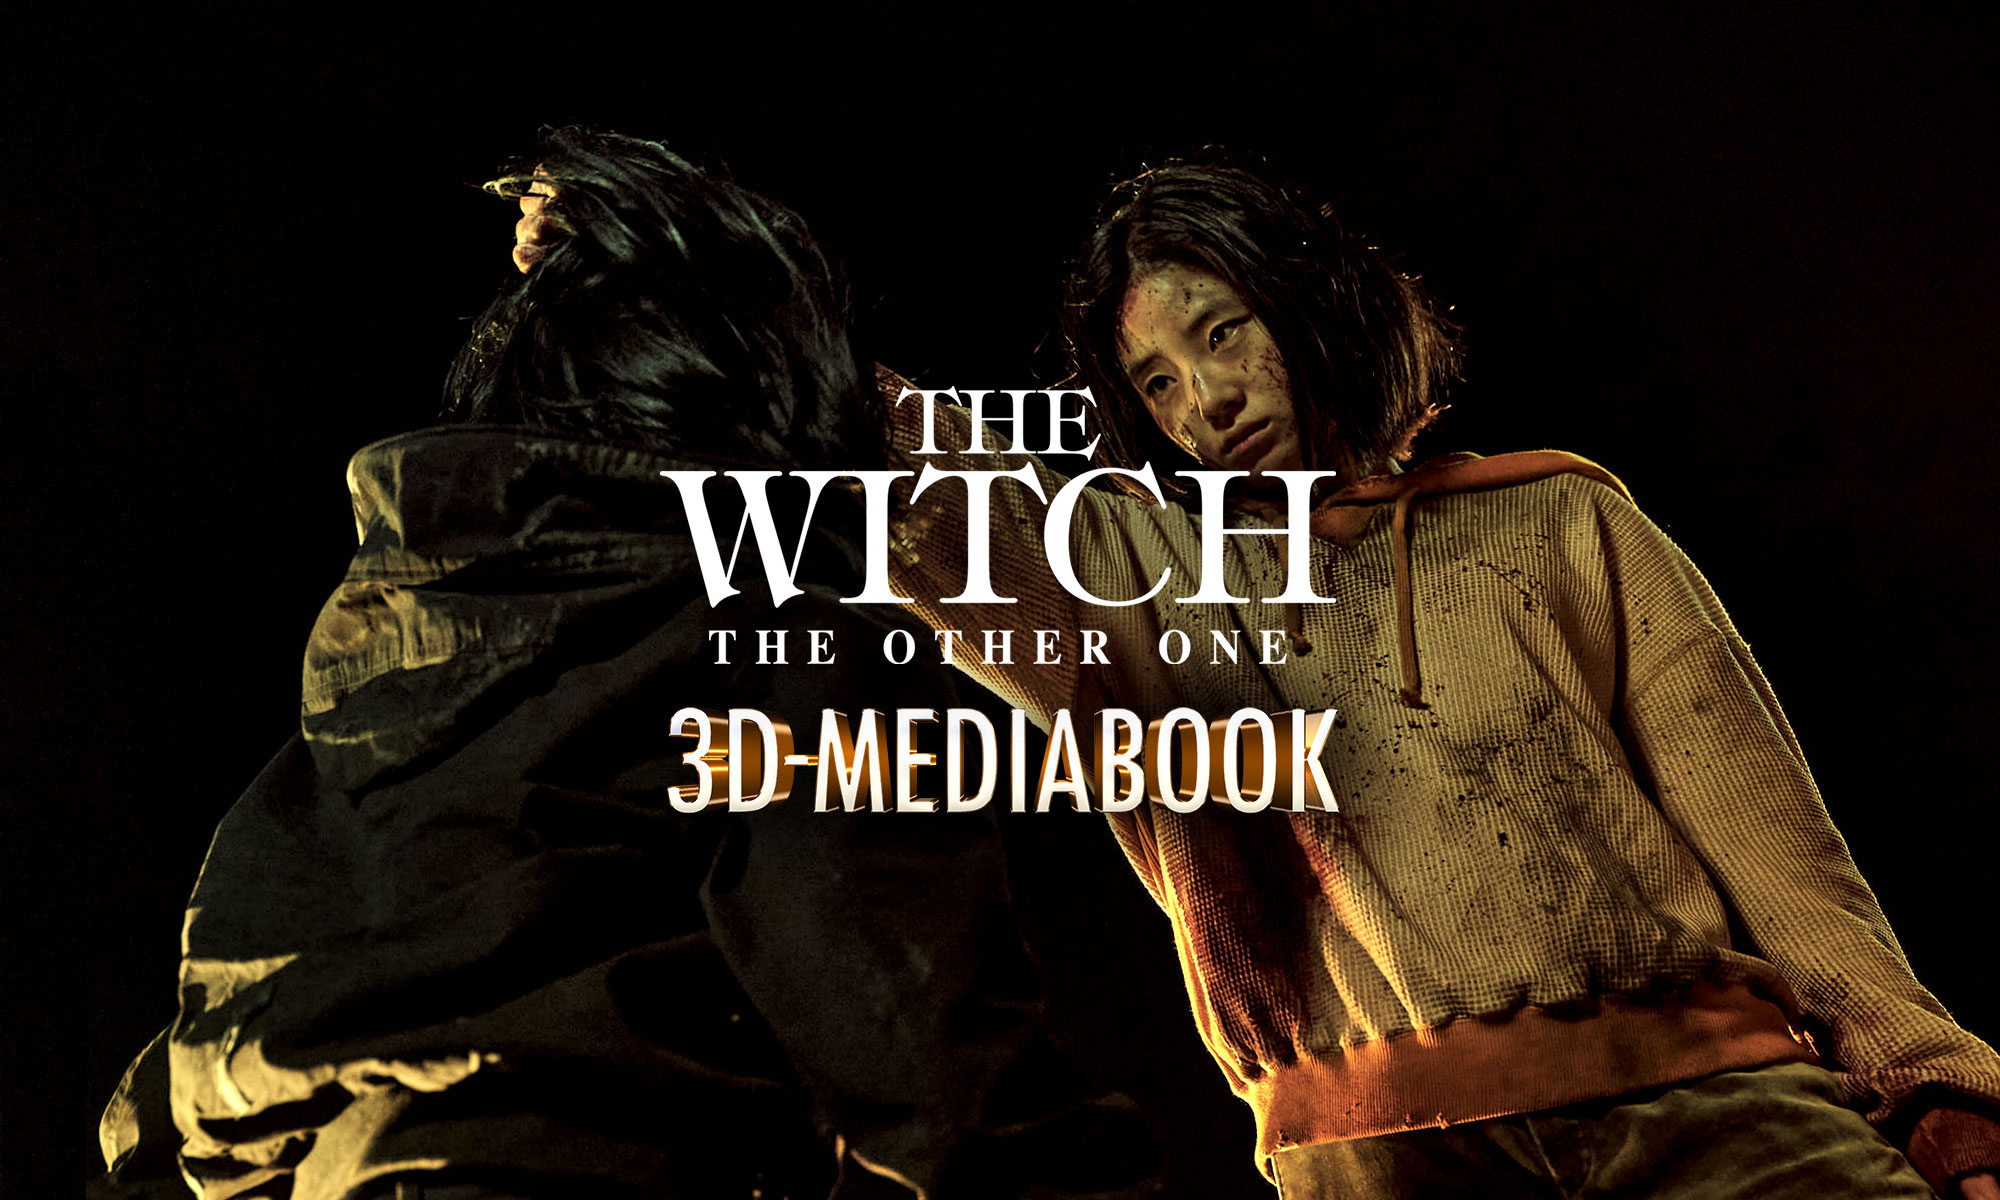 The Witch - 3D-MEDIABOOK Produkt Animation